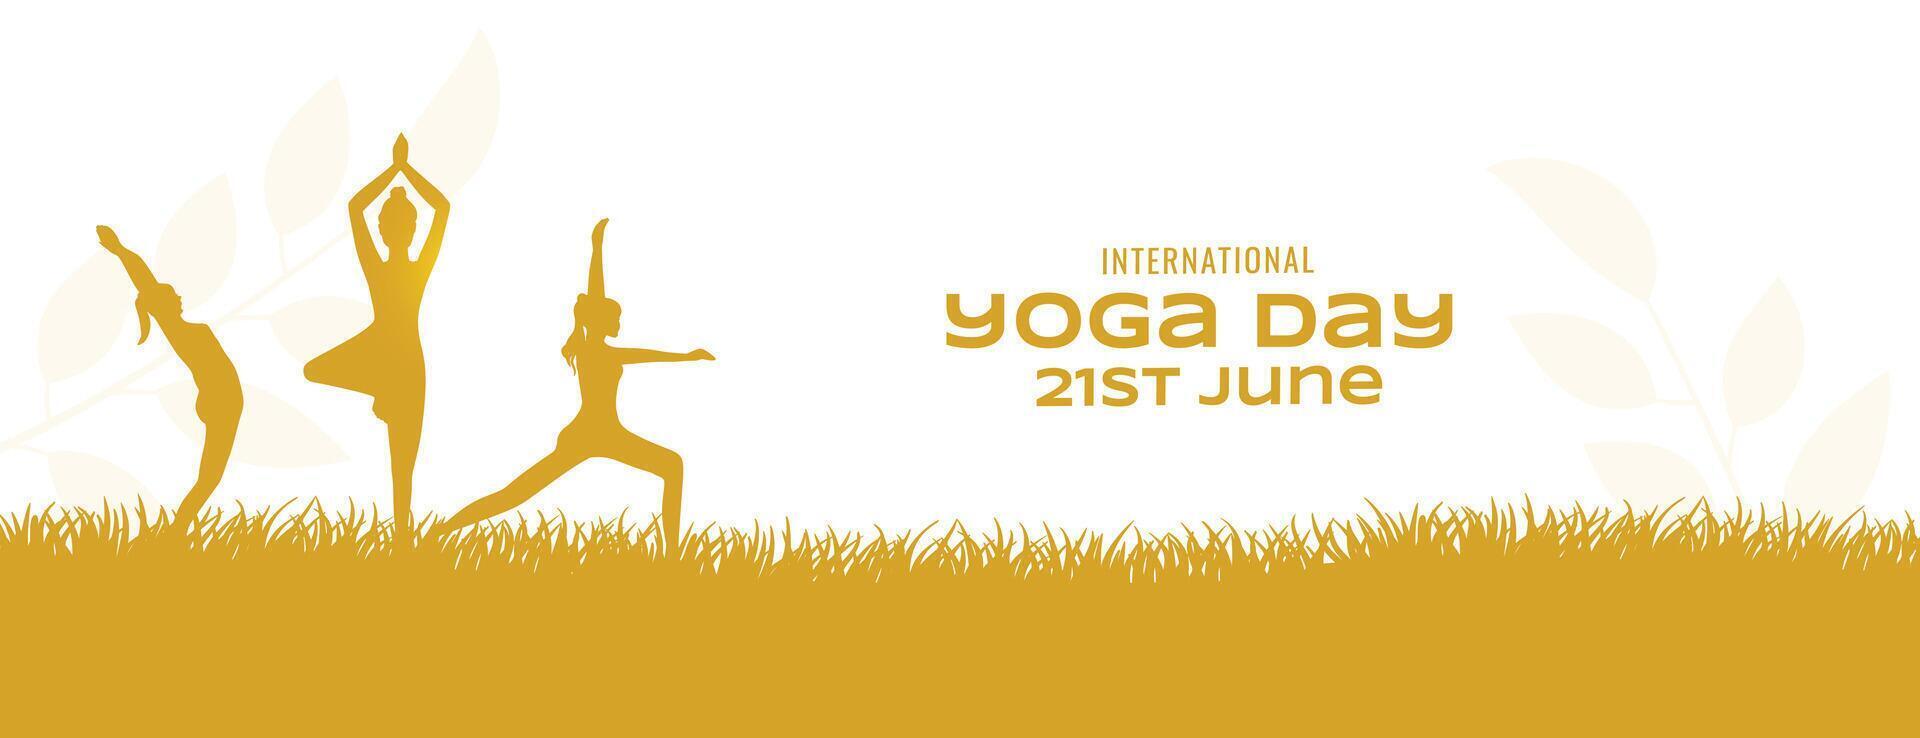 world yoga day celebration banner with women doing exercise on grass vector